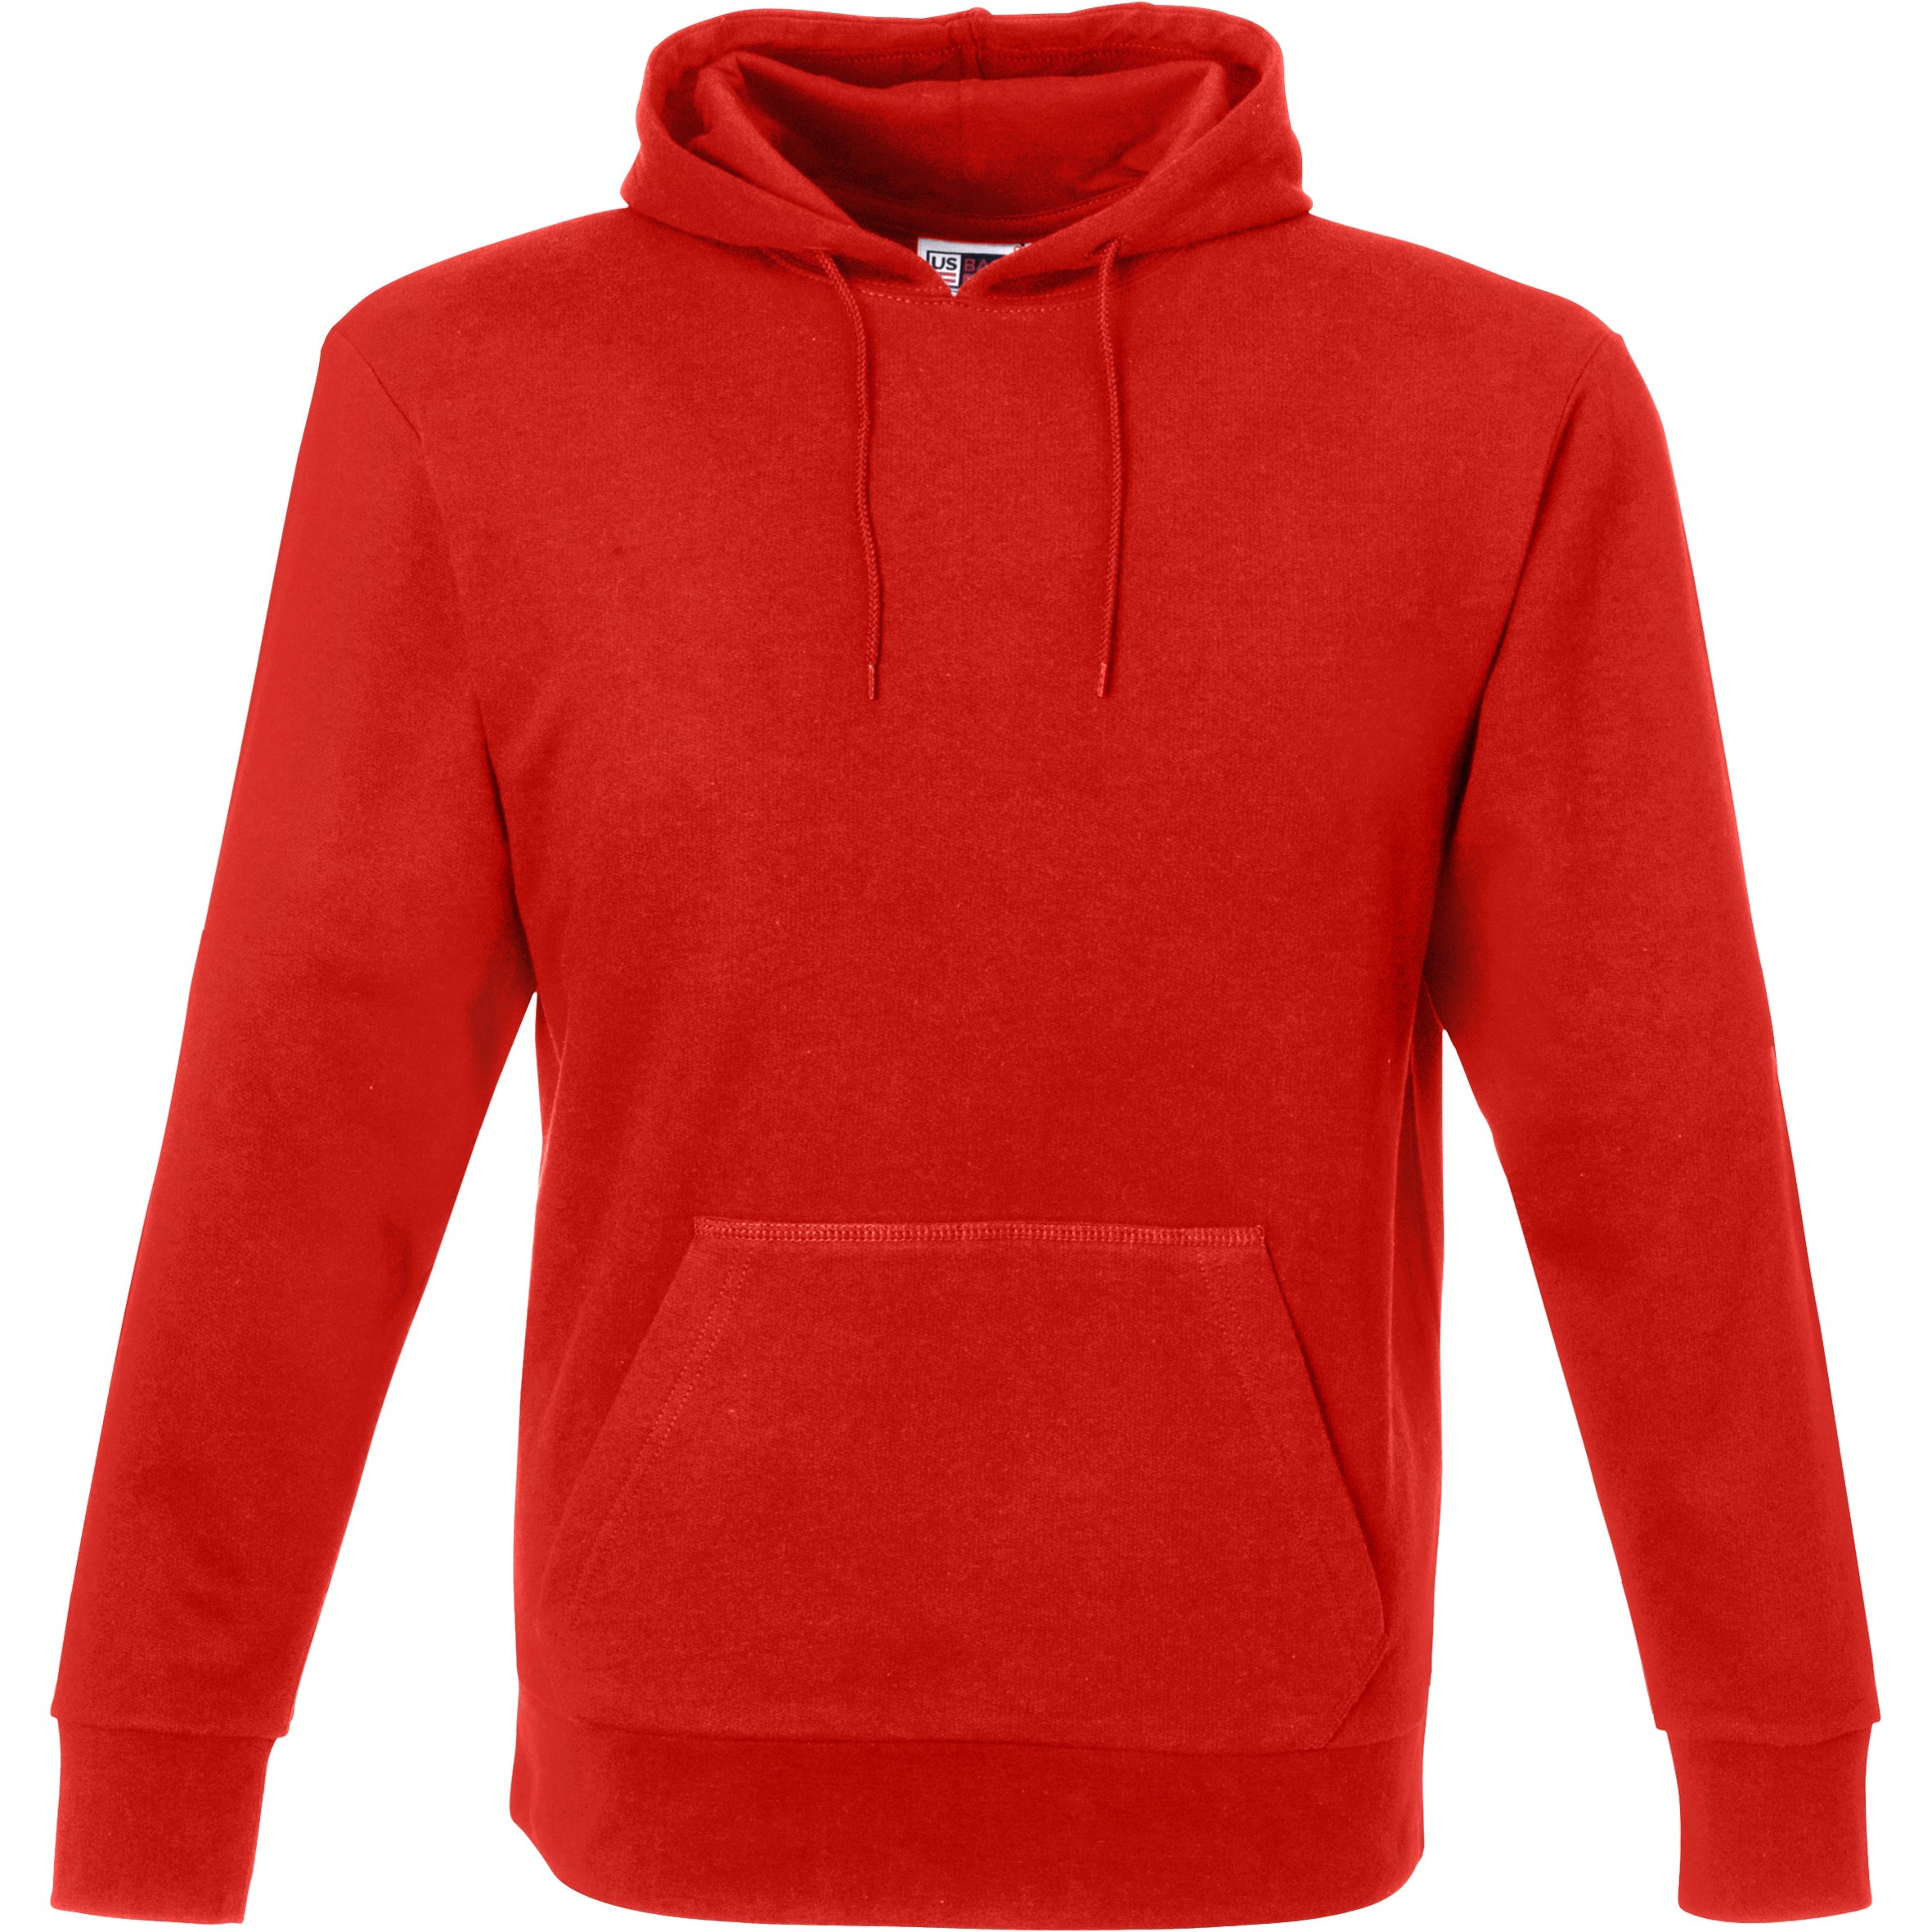 Mens Omega Hooded Sweater-2XL-Red-R